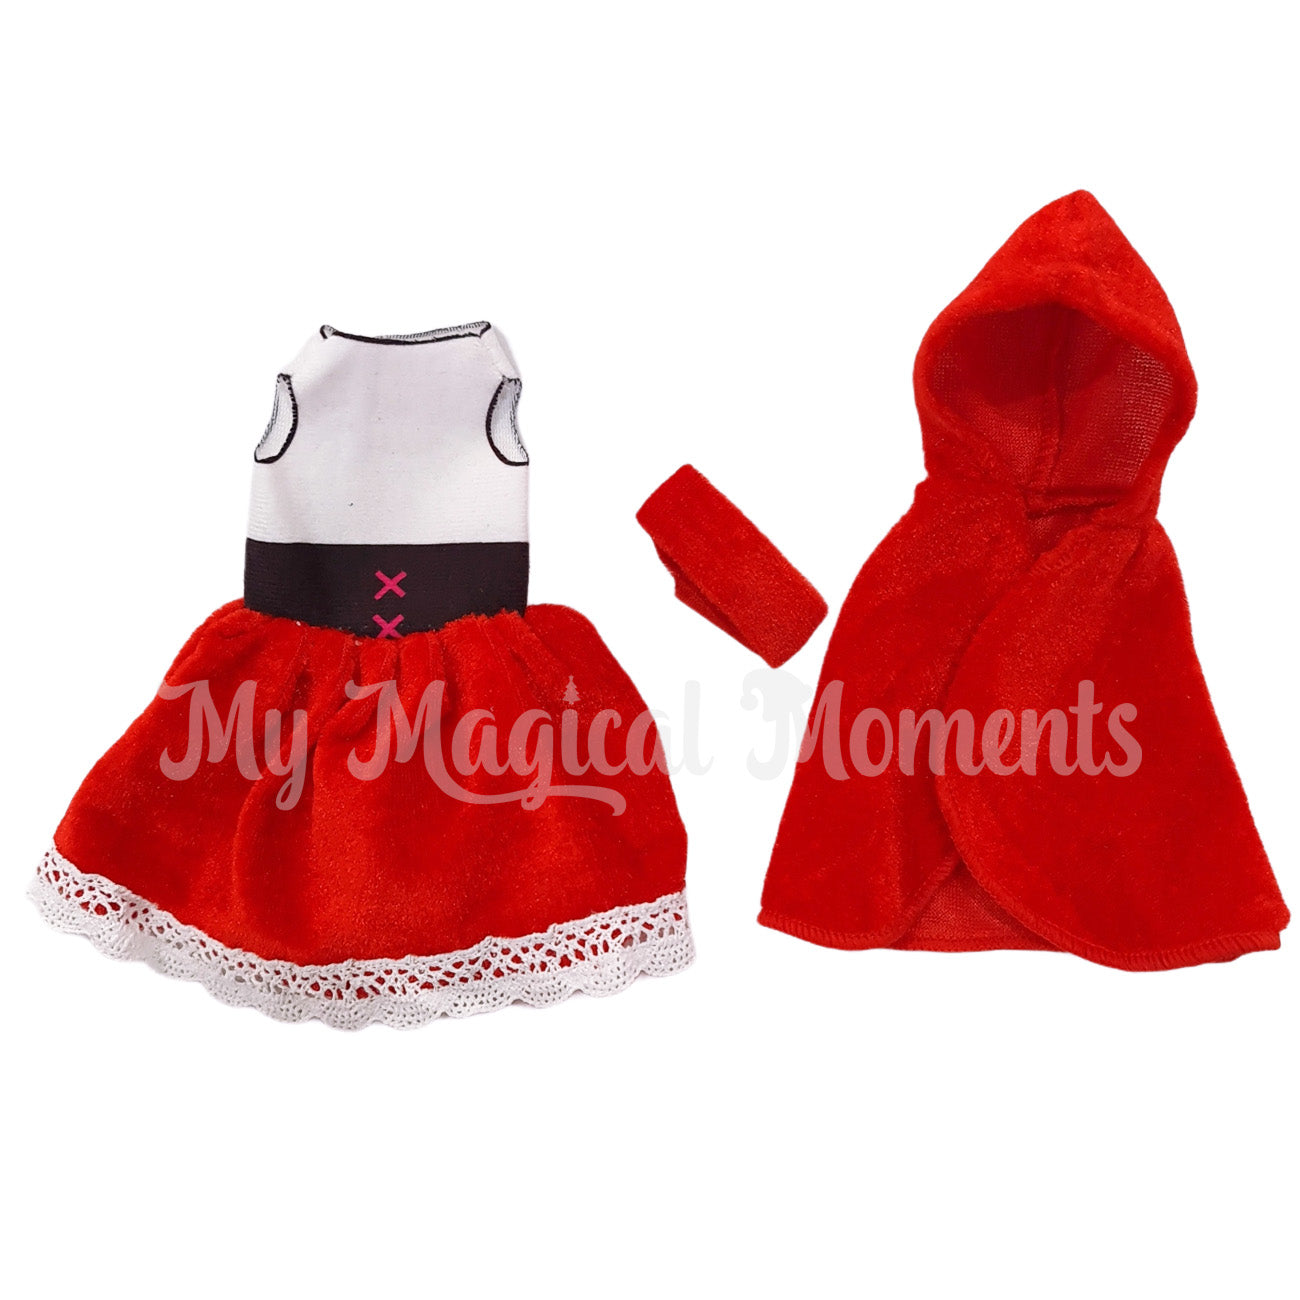 Little red riding hood elf outfit with hood and dress